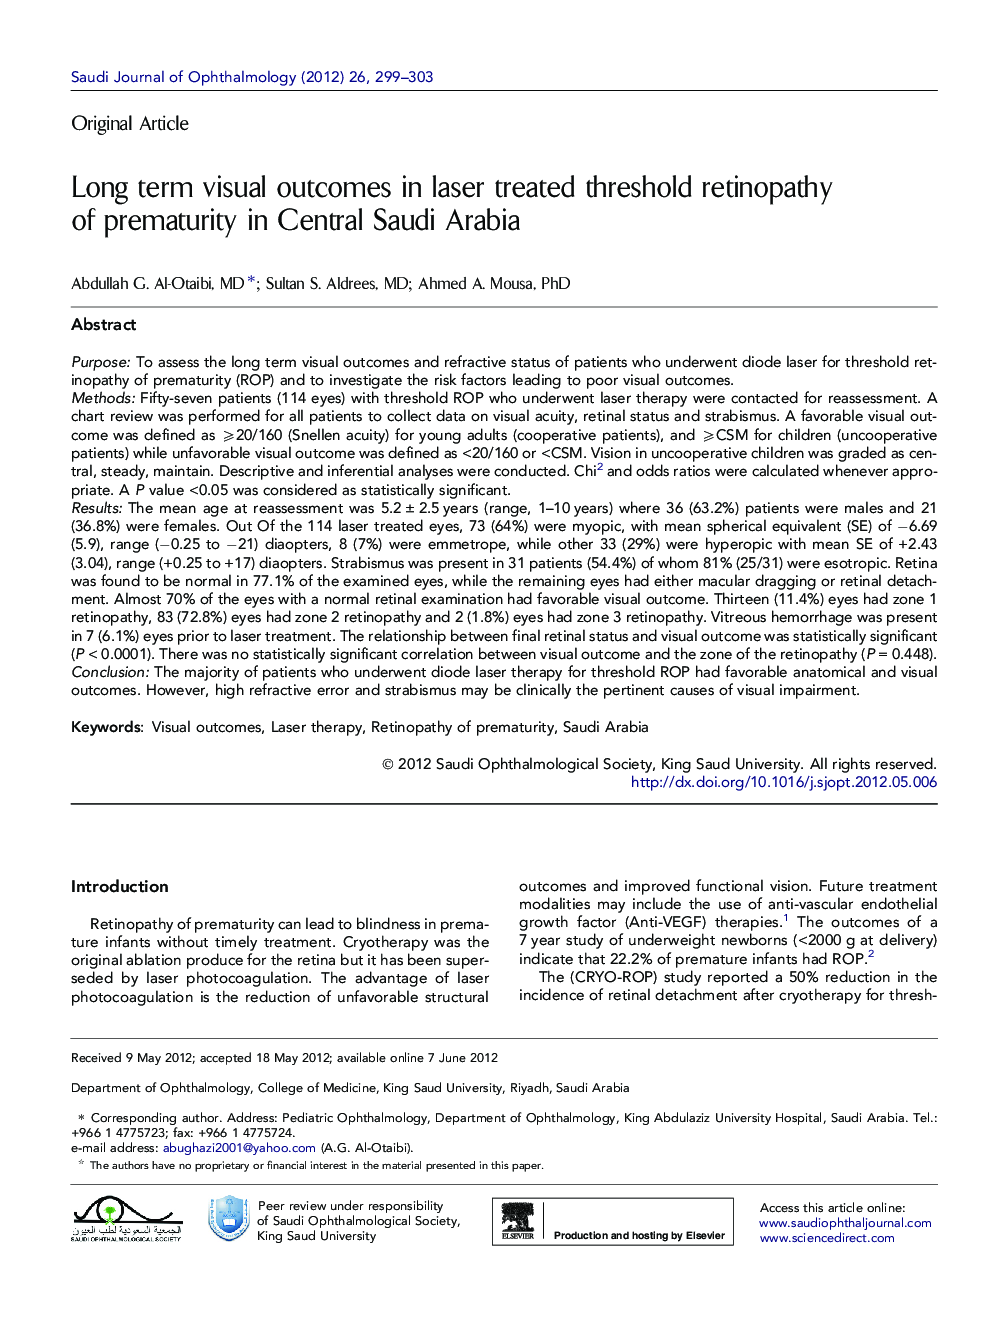 Long term visual outcomes in laser treated threshold retinopathy of prematurity in Central Saudi Arabia 